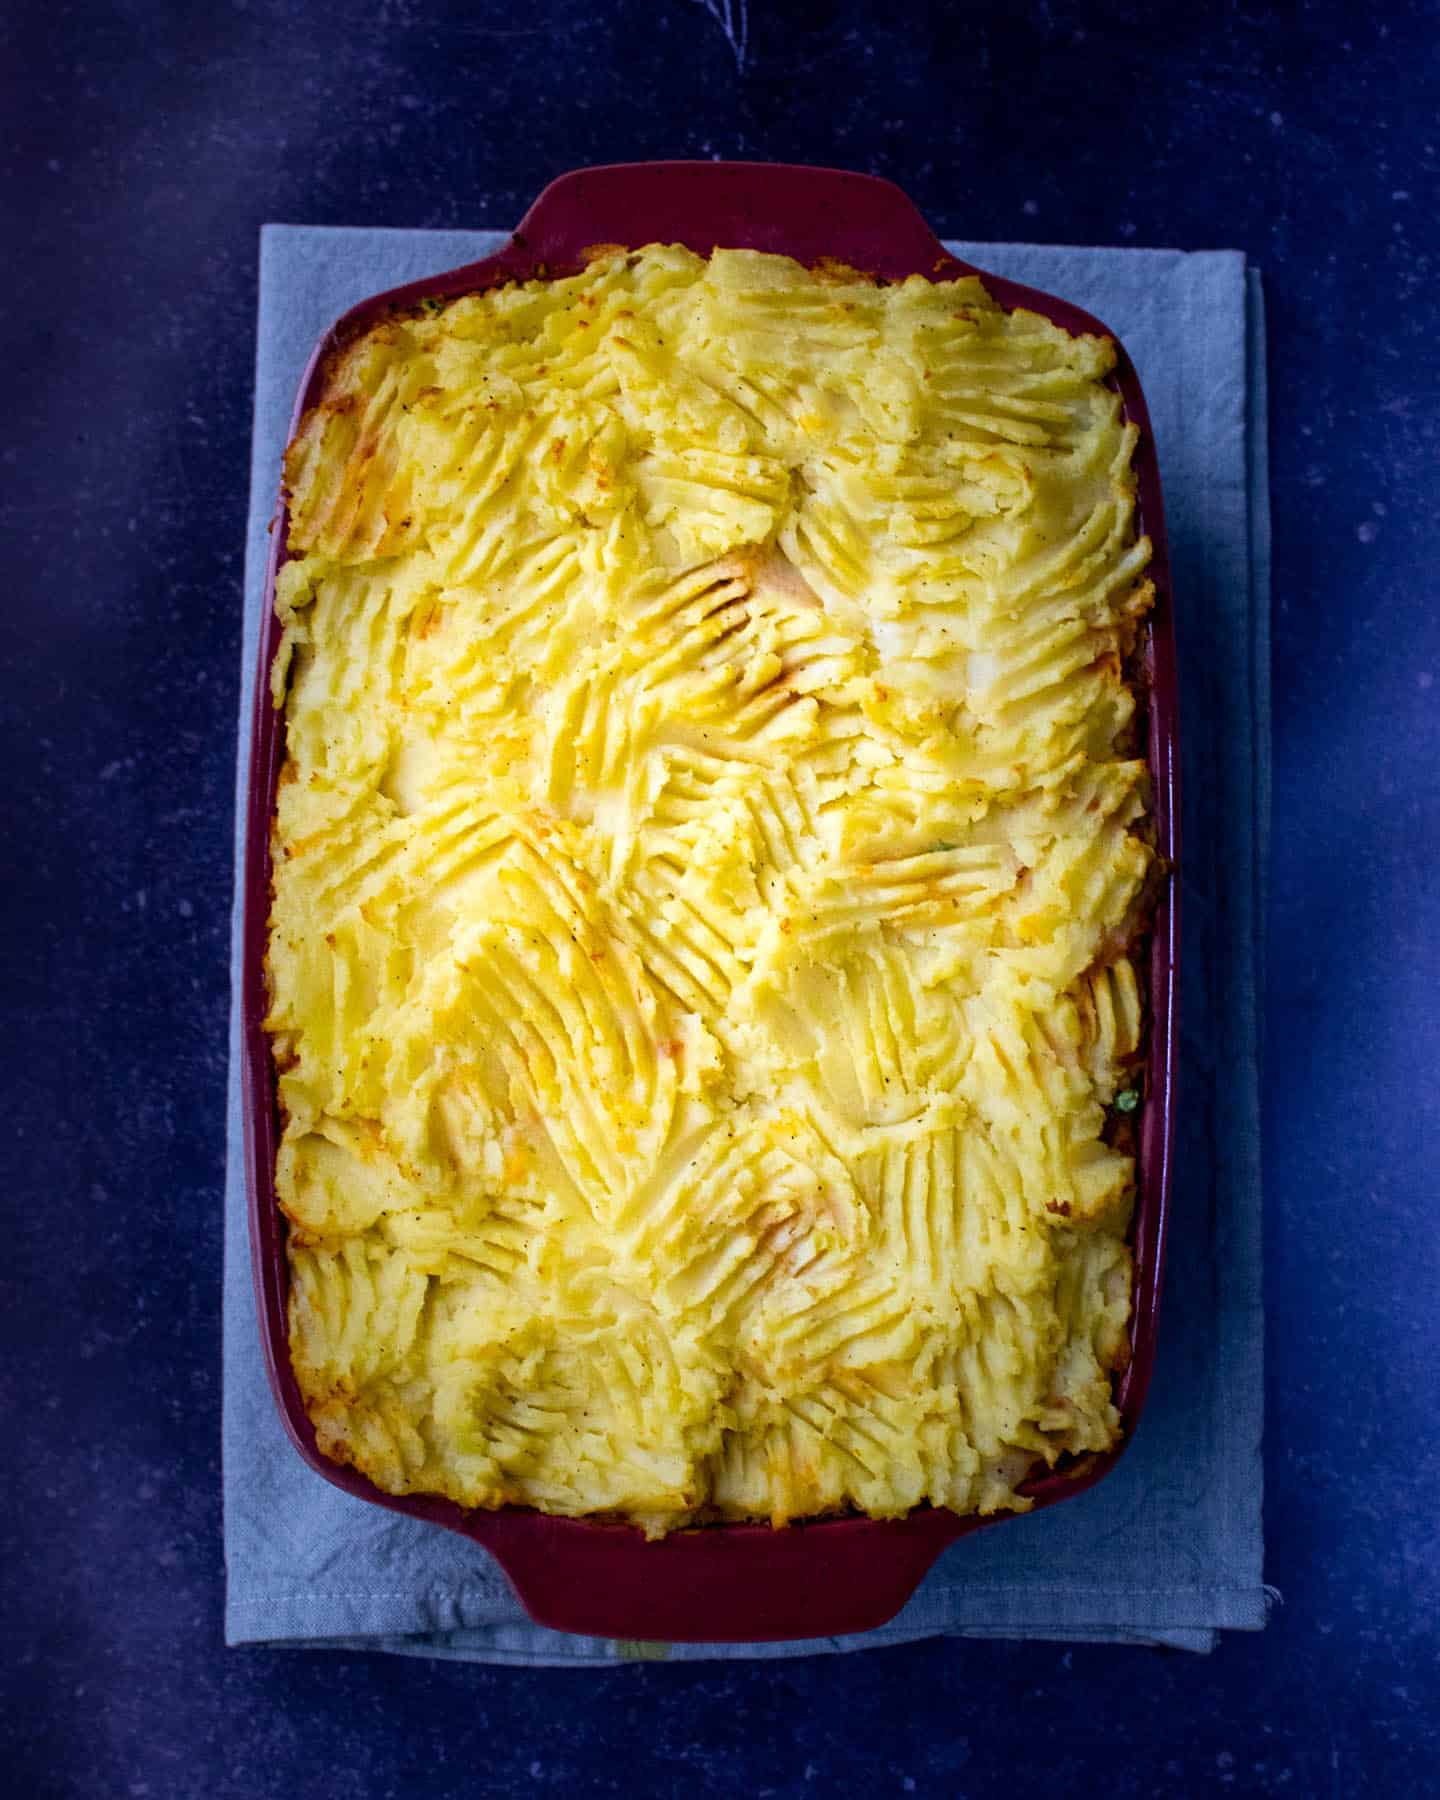 A top down view of a red baking dish full to the top with mash potato that has fork imprints all over it. All set on a dark blue background